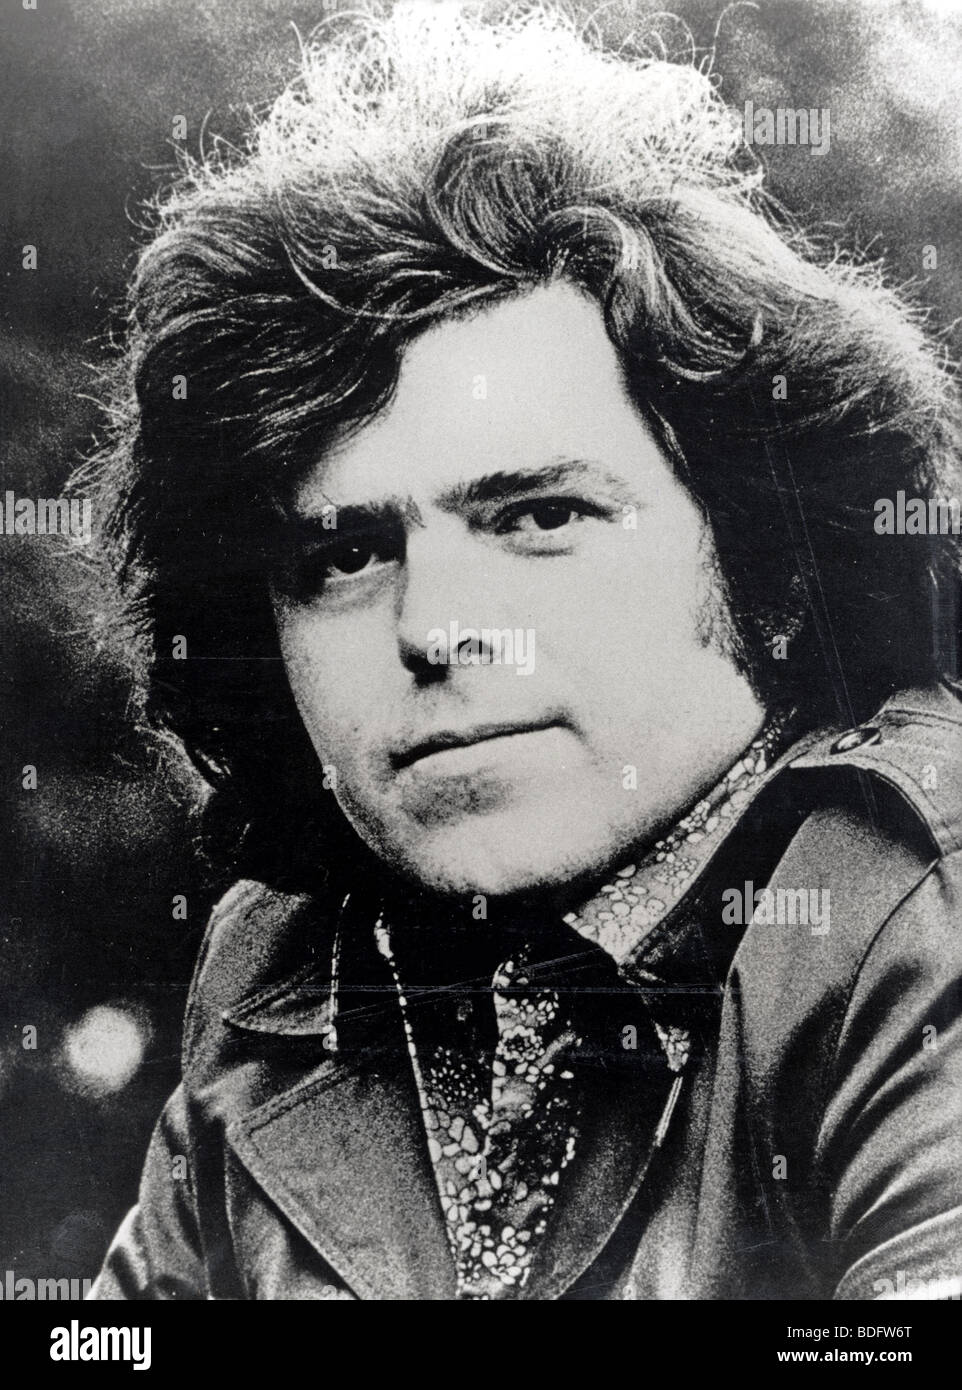 TIM ROSE - US singer about 1975 Stock Photo - Alamy